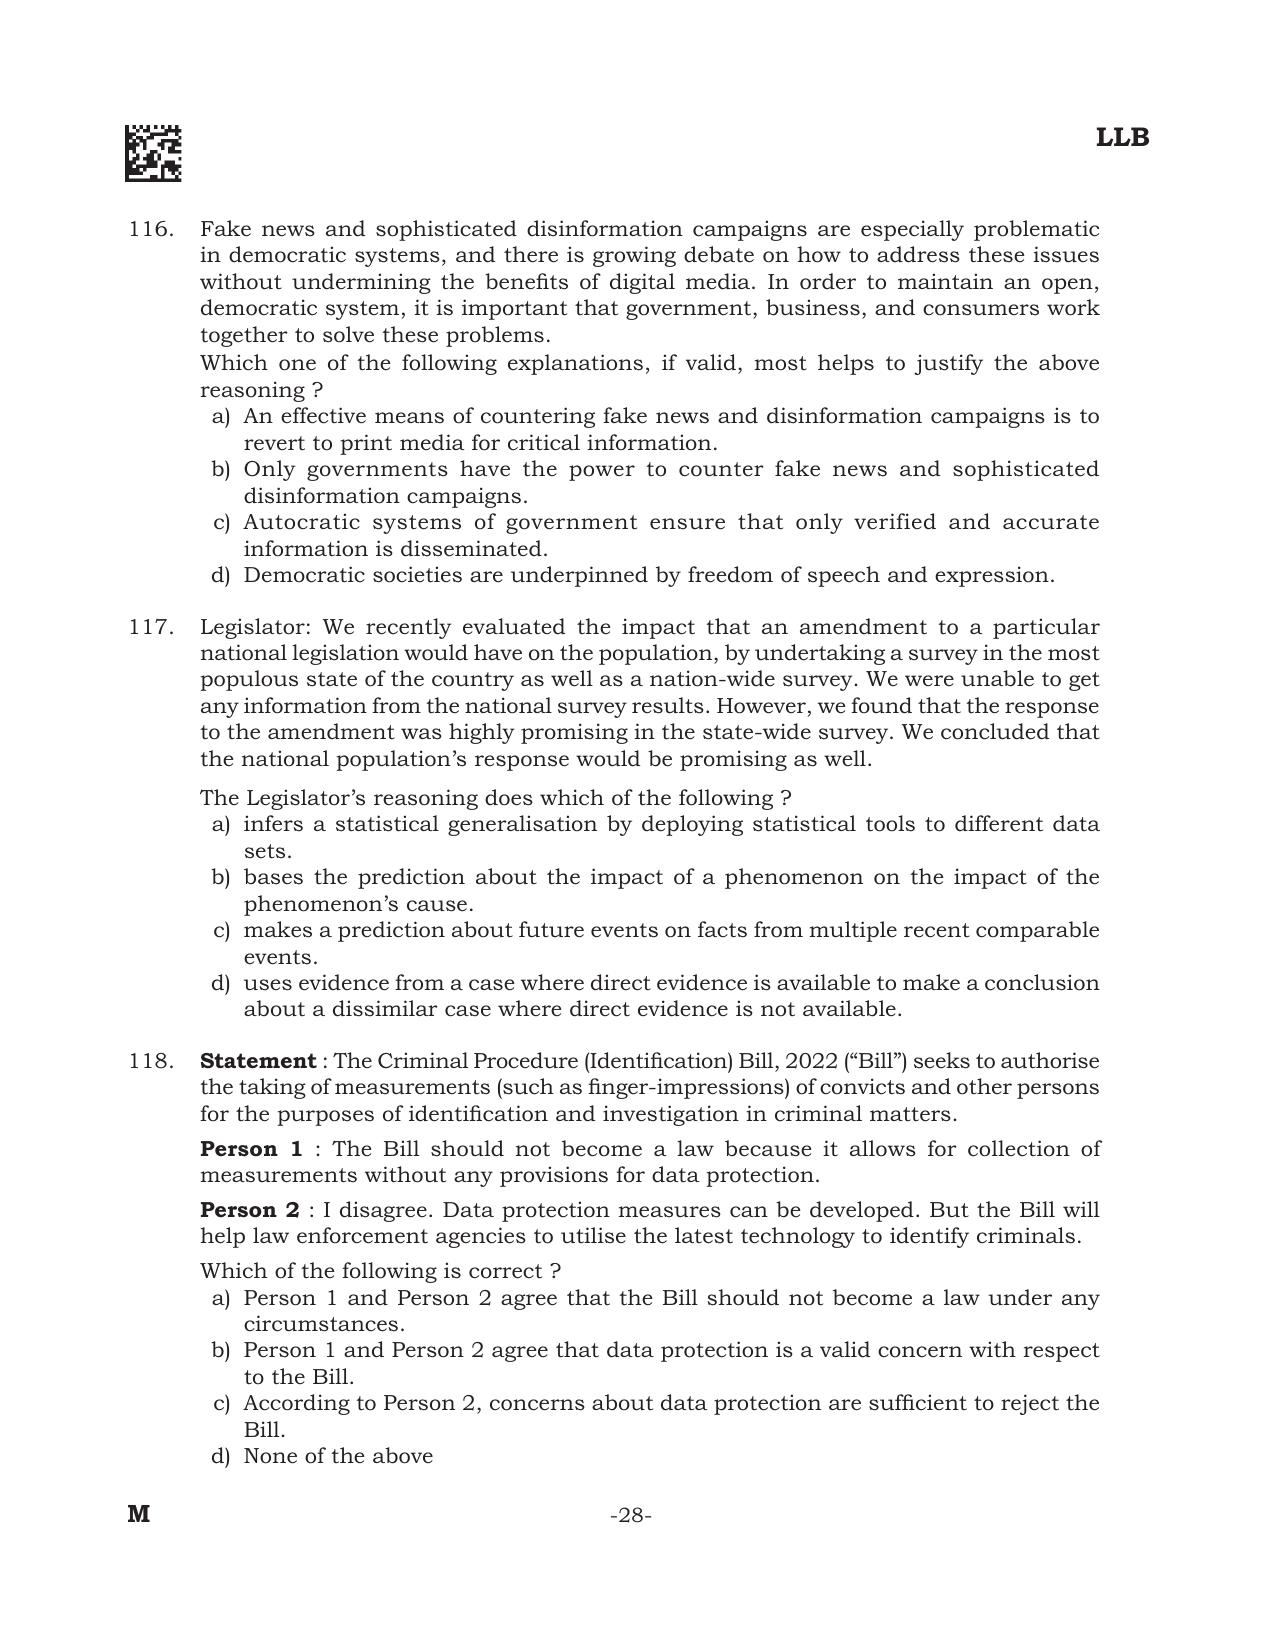 AILET 2022 Question Paper for BA LLB - Page 28